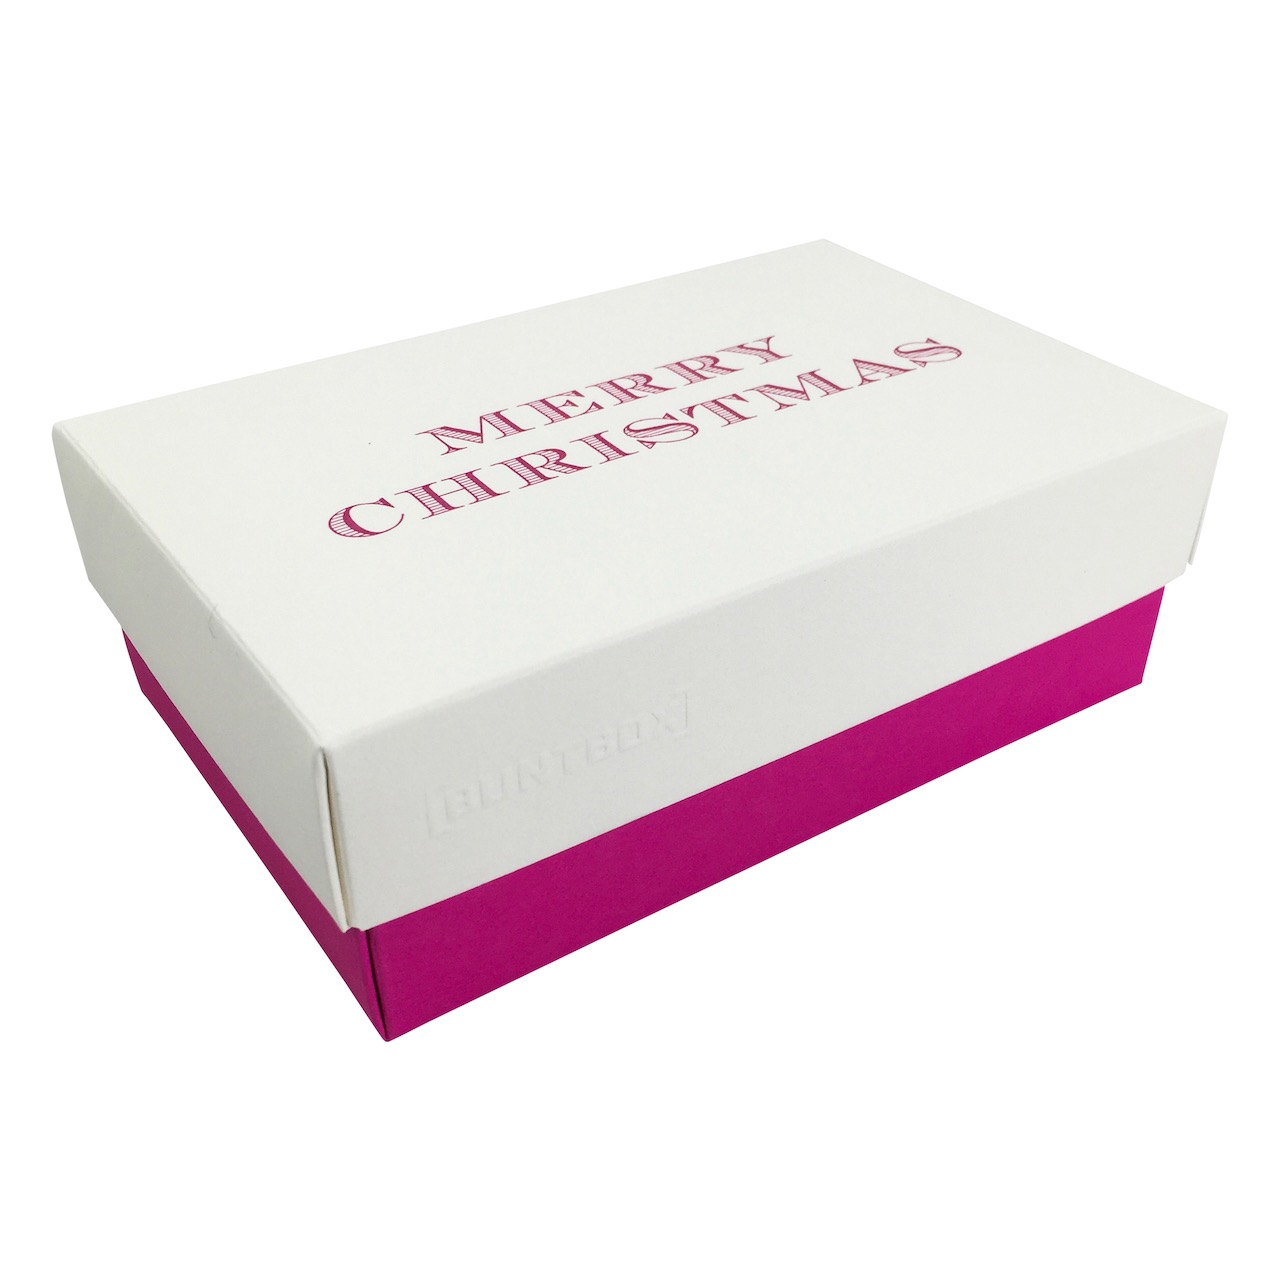 Buntbox S Fine Paper Christmas in Champagner-Magenta